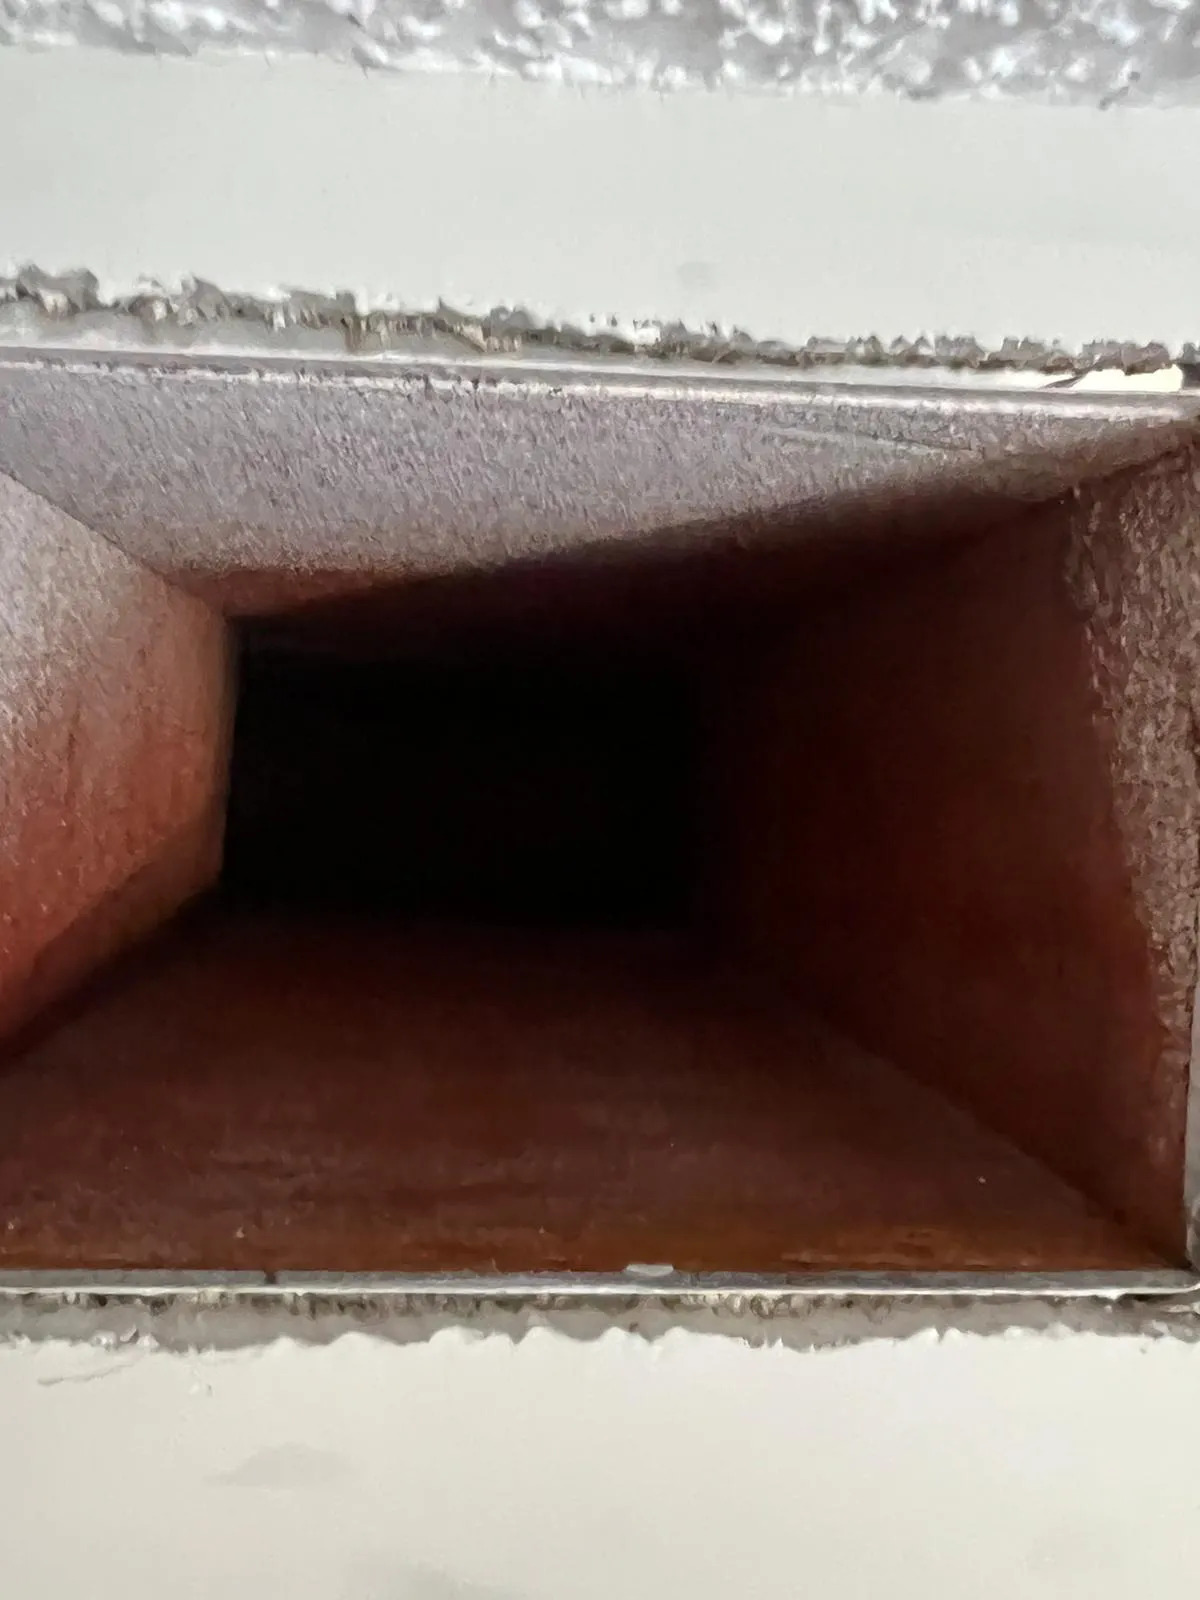 Air Duct Cleaning Services in Port St Lucie - Clean Quality Air